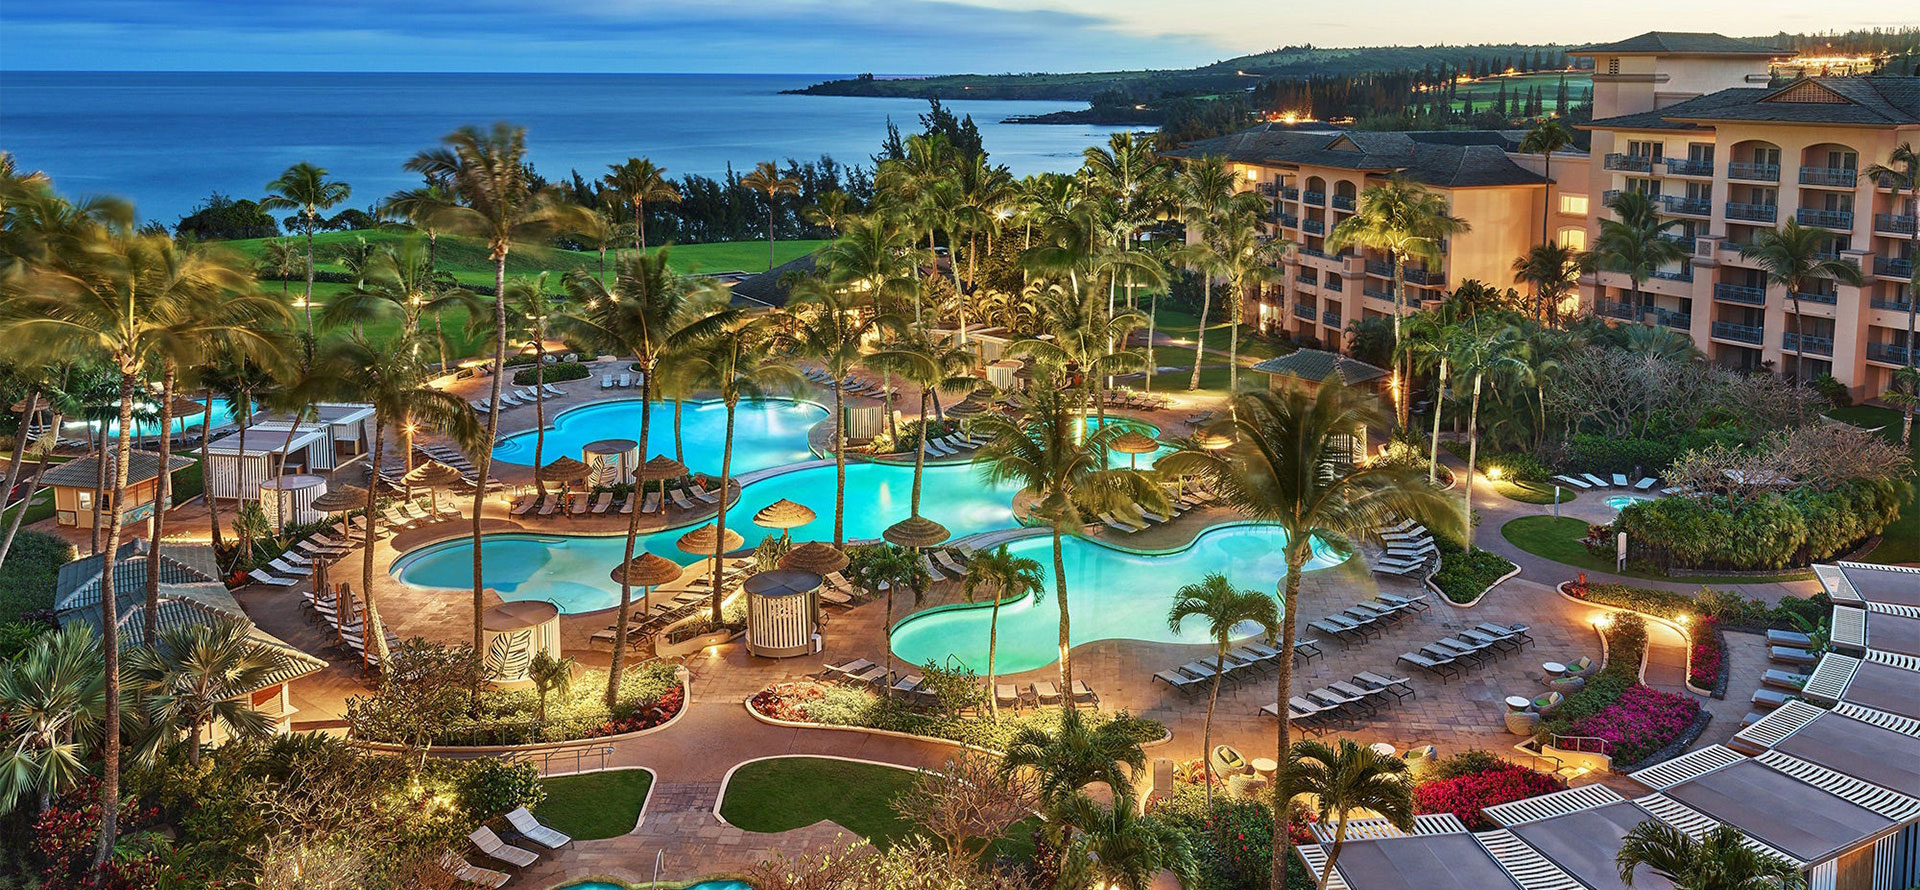 Luxury hotels in hawaii at night.